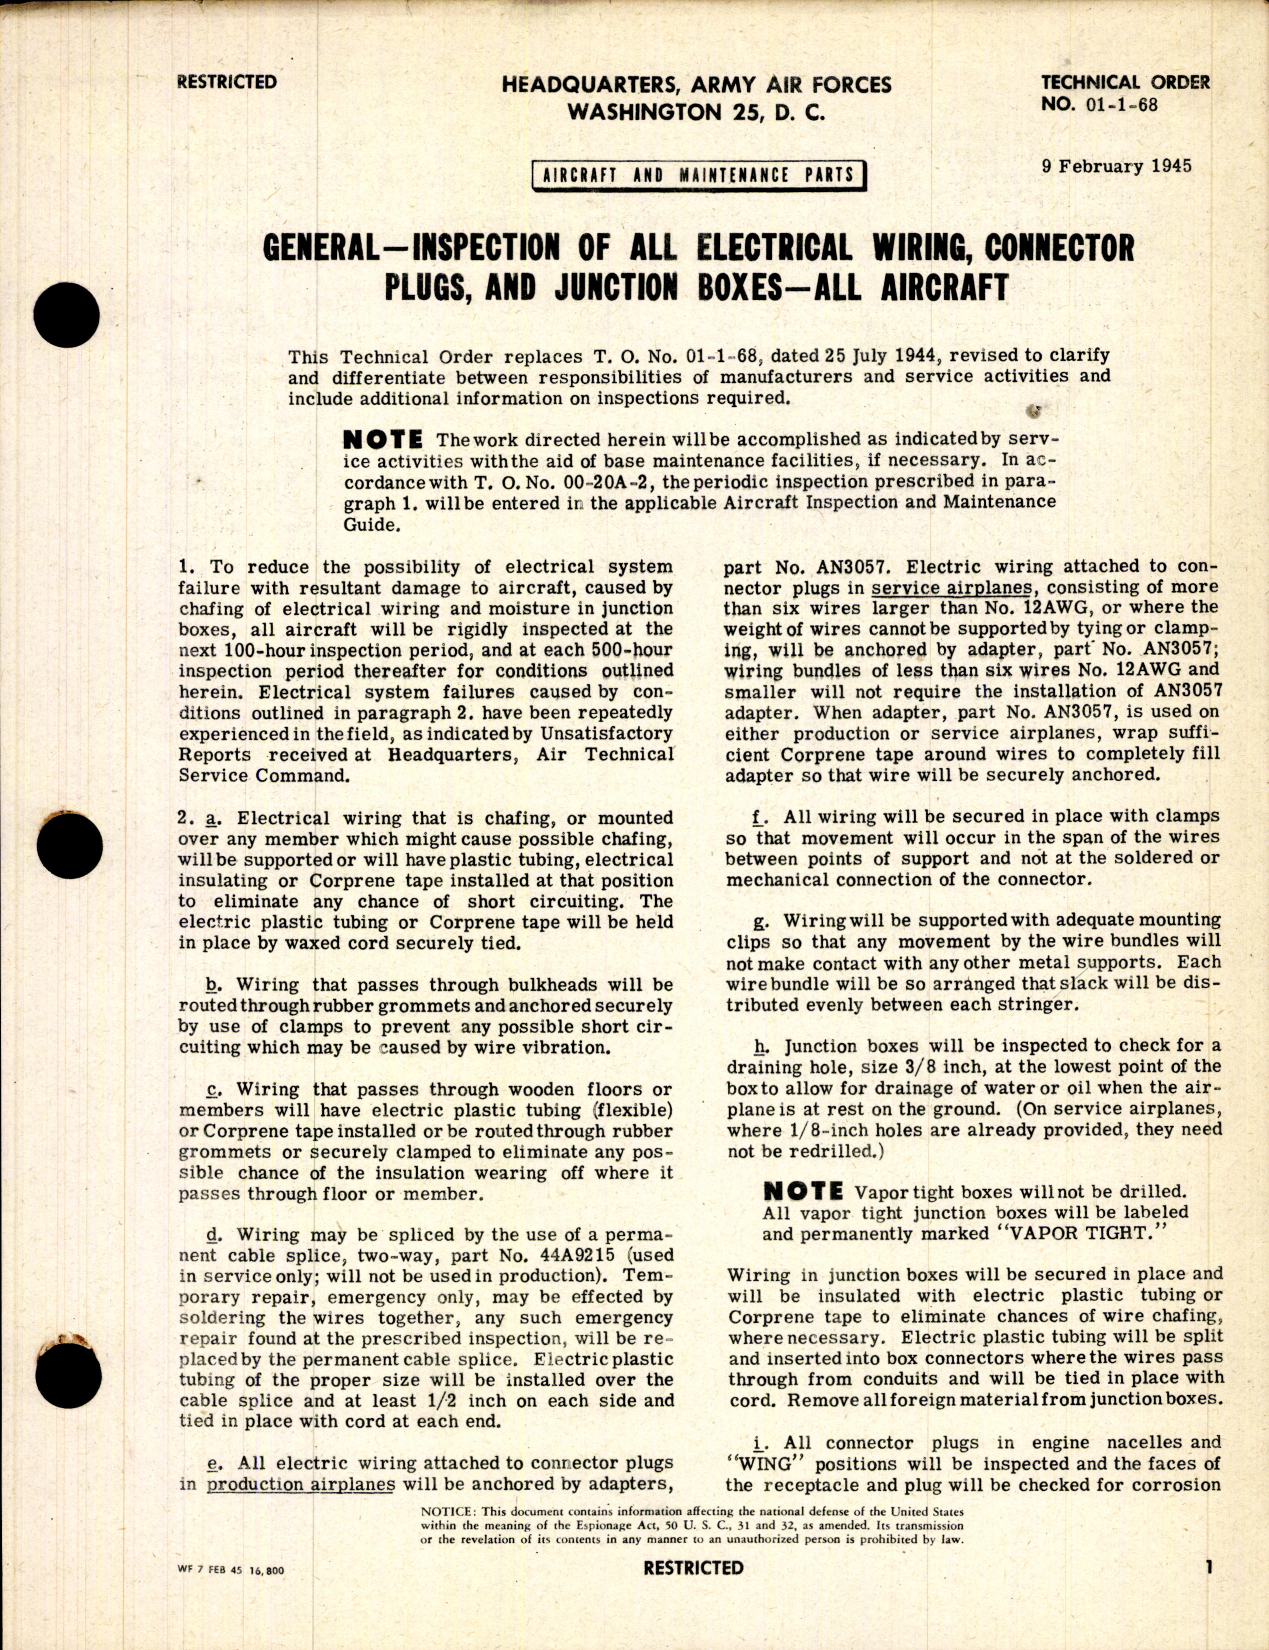 Sample page 1 from AirCorps Library document: Inspection of All Electrical Wiring, Connector Plugs, and Junction Boxes for All Aircraft